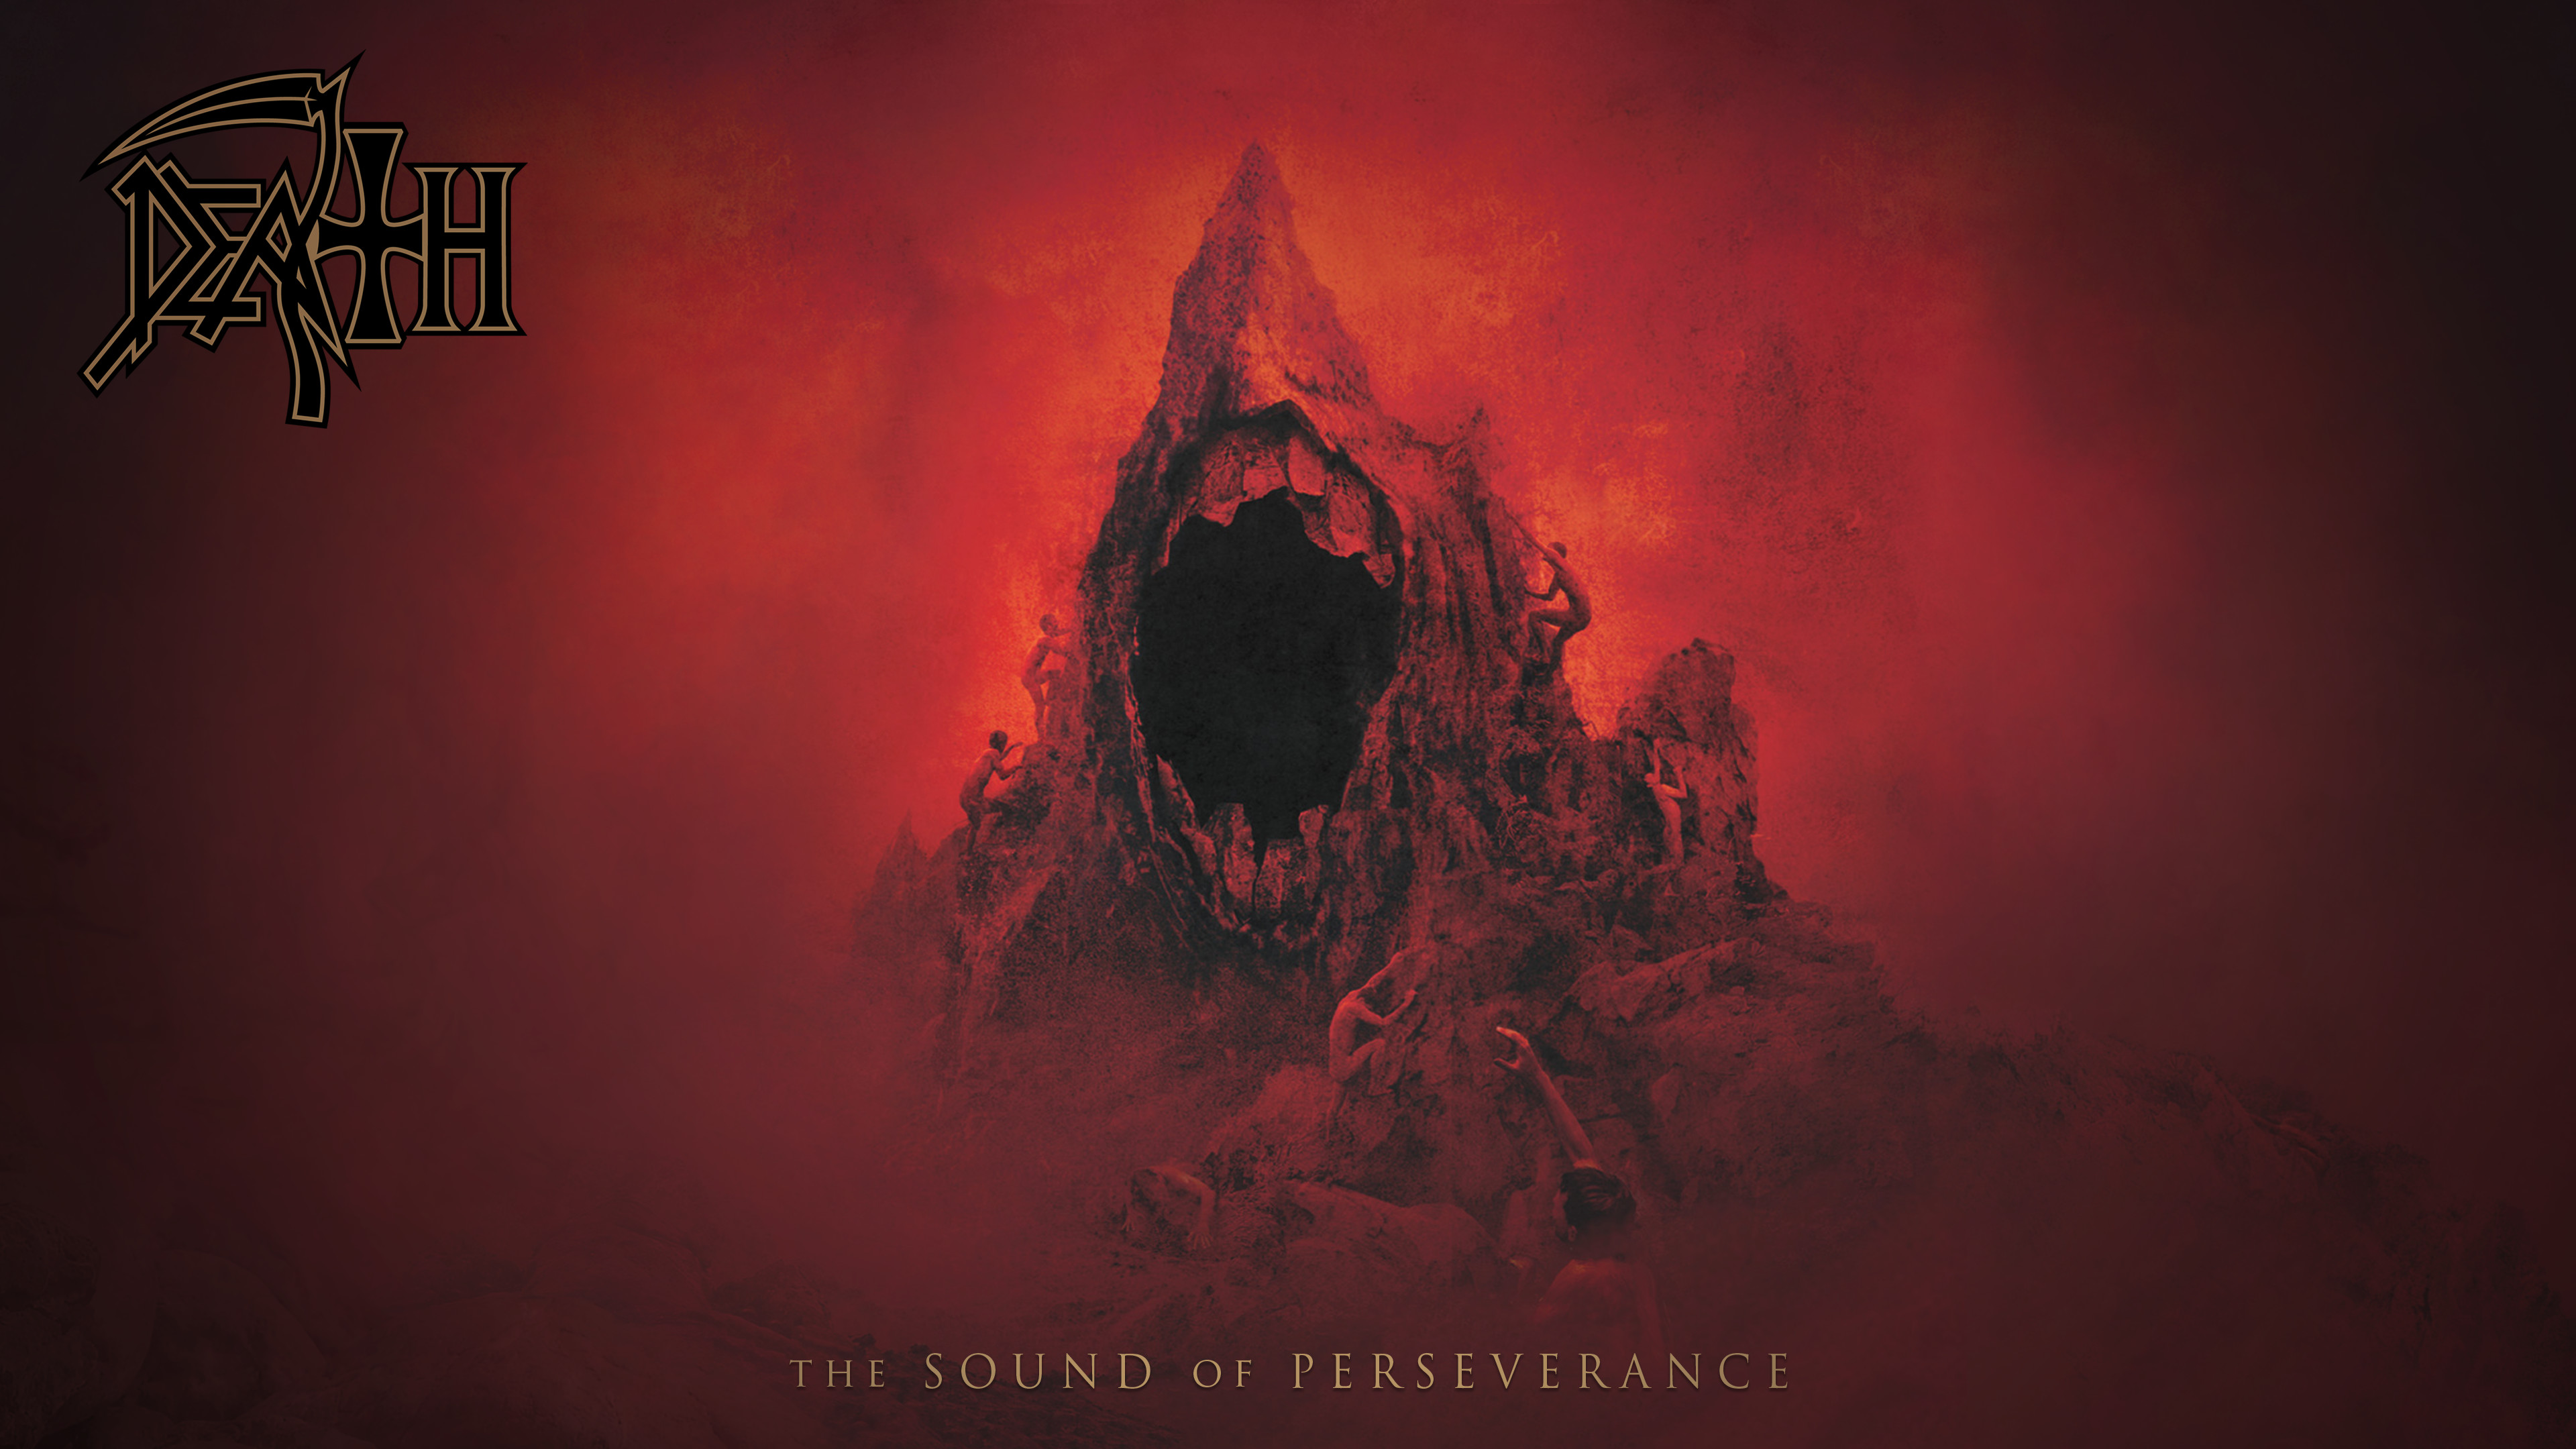 3840x2160 ... Thehumandeath Death, The Sound of Perseverance by Thehumandeath